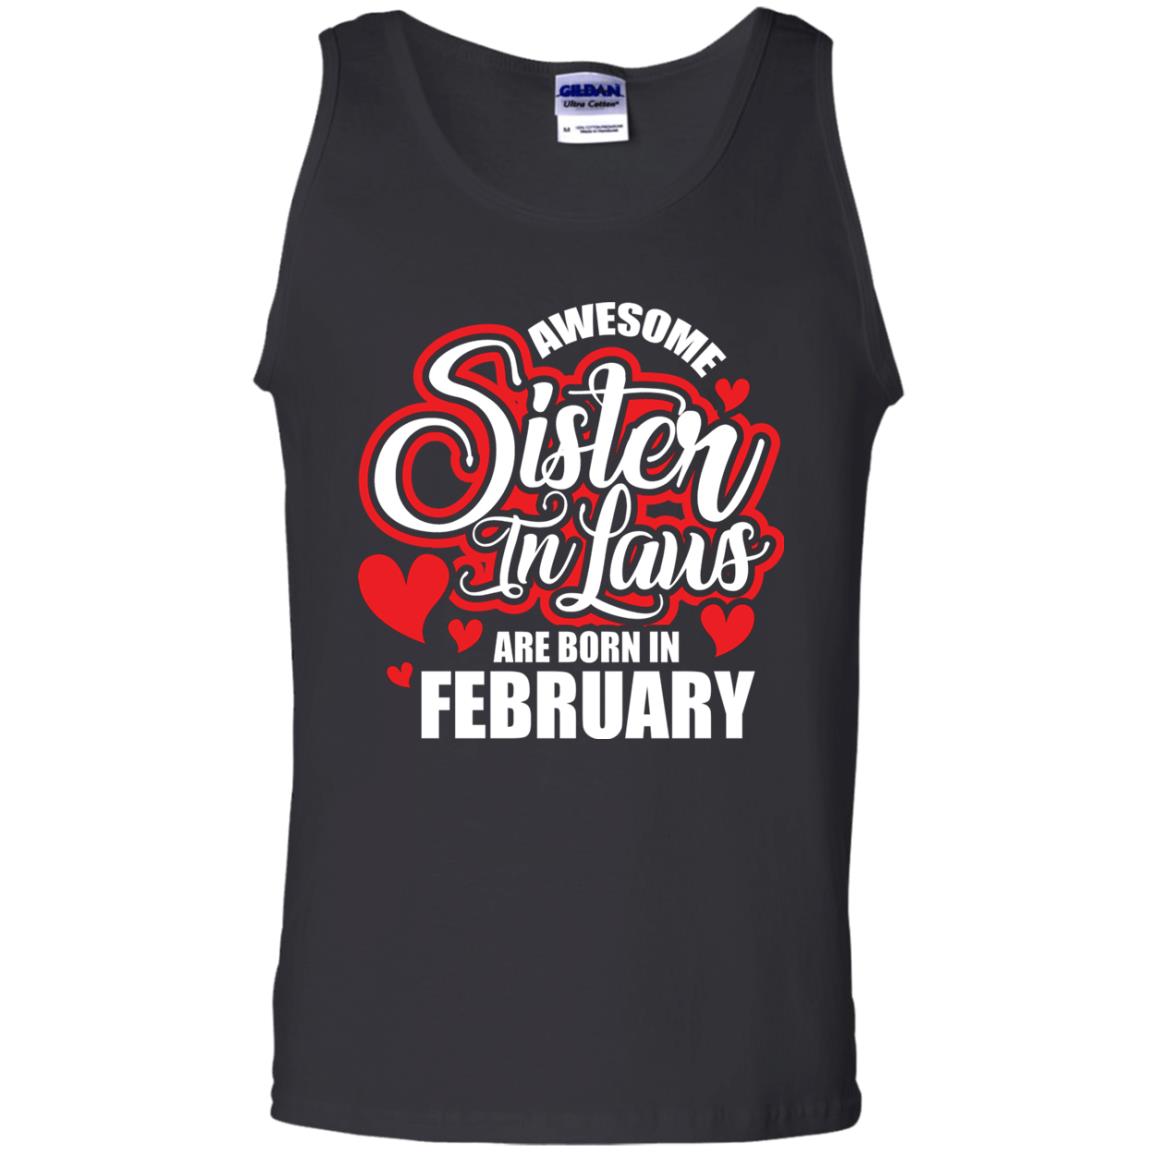 February T-shirt Awesome Sister In Laws Are Born In February